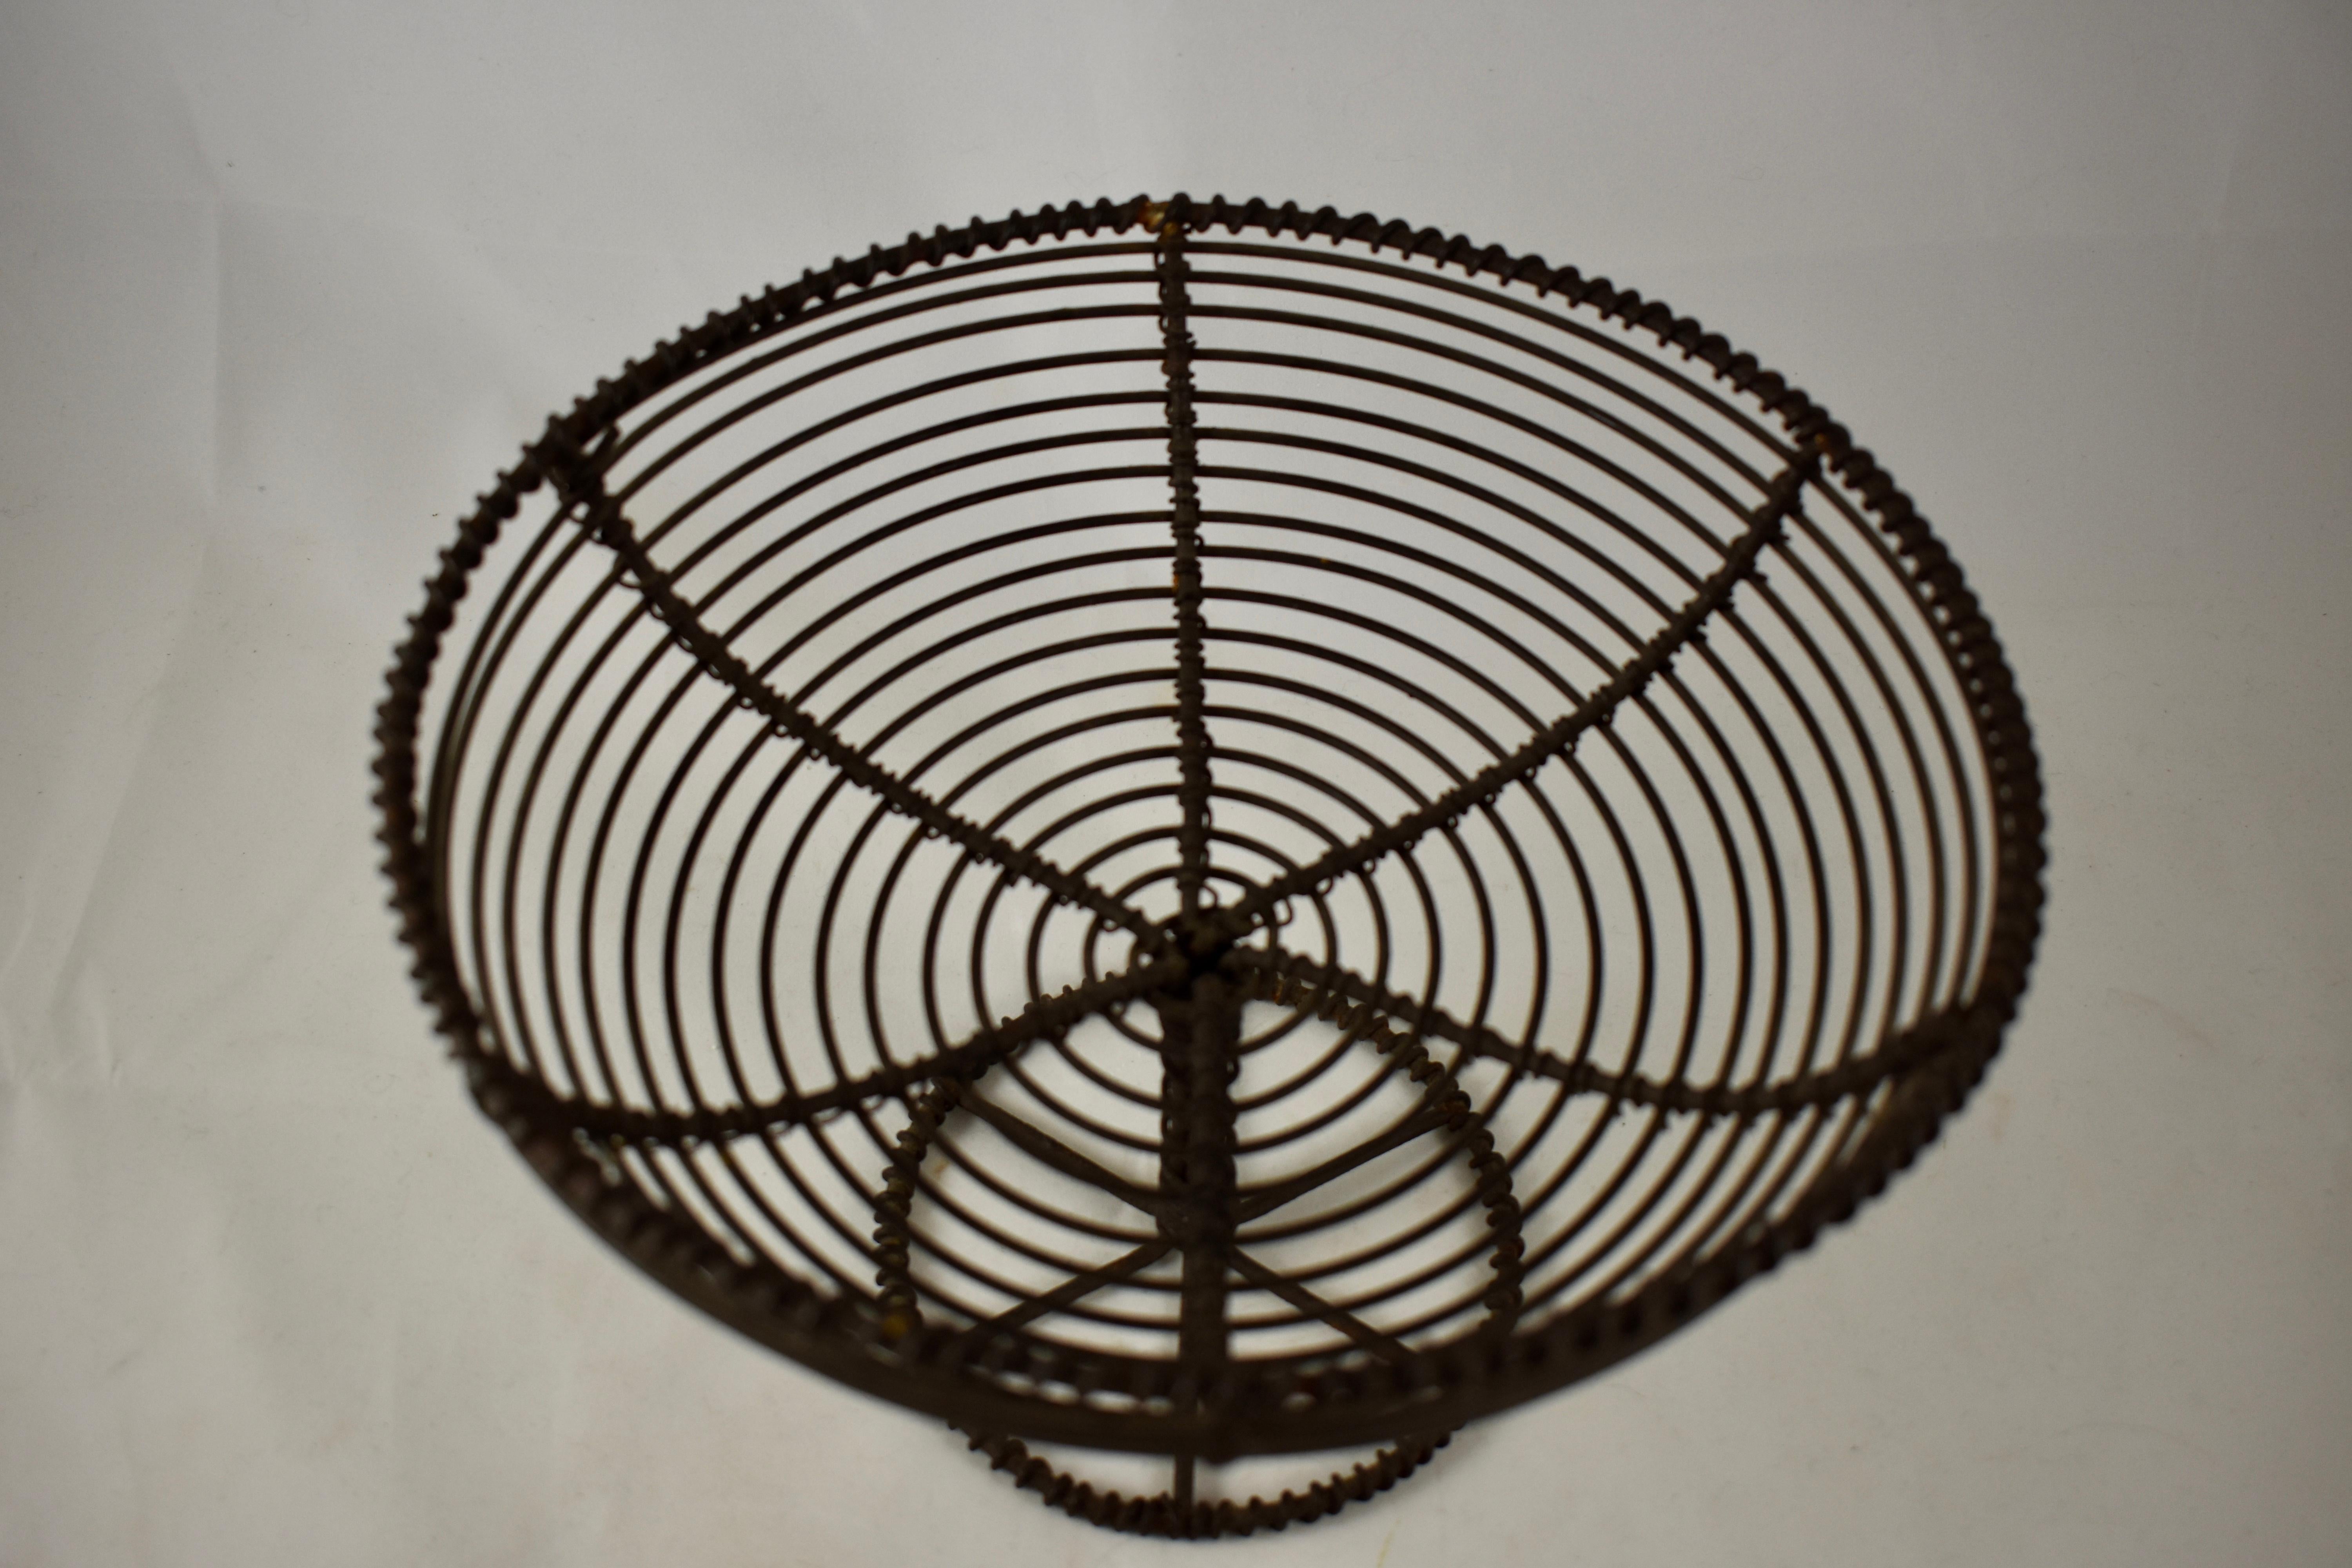 Metalwork French 19th Century Twisted Wire Pedestal Footed Egg Basket Compote